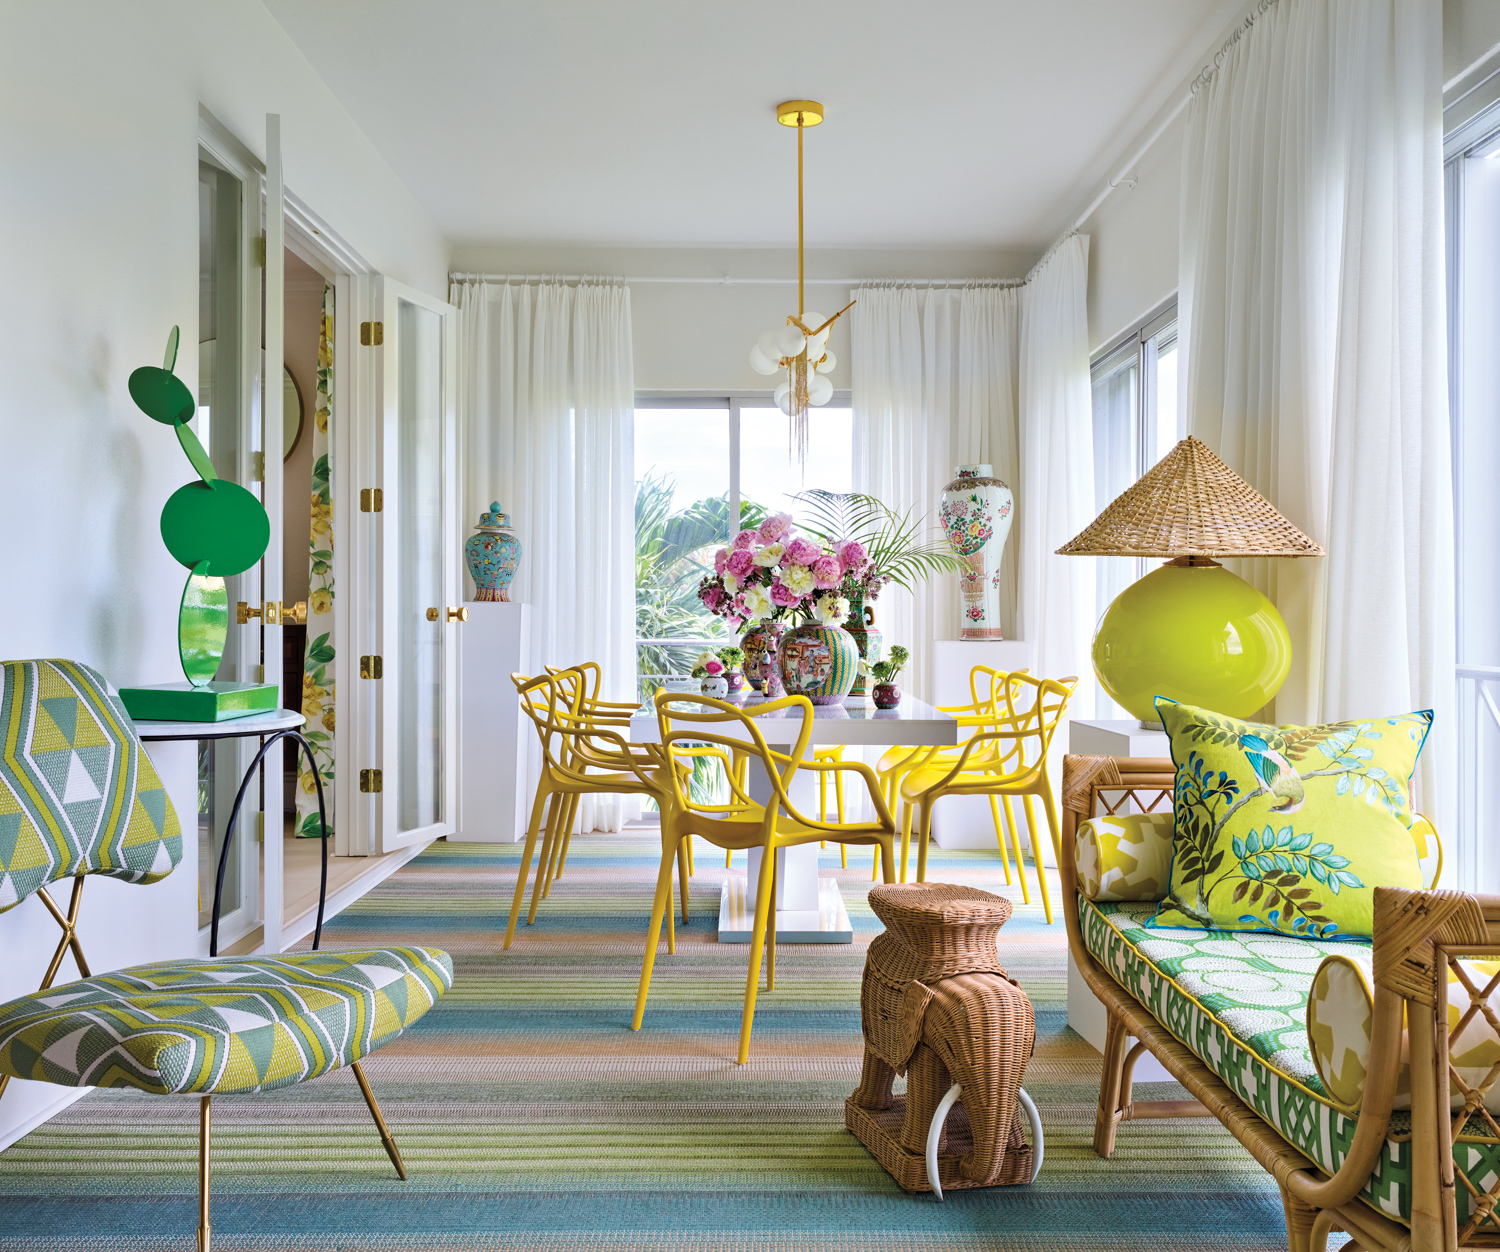 dining room with yellow chairs, elephant side table and sculptural chandelier